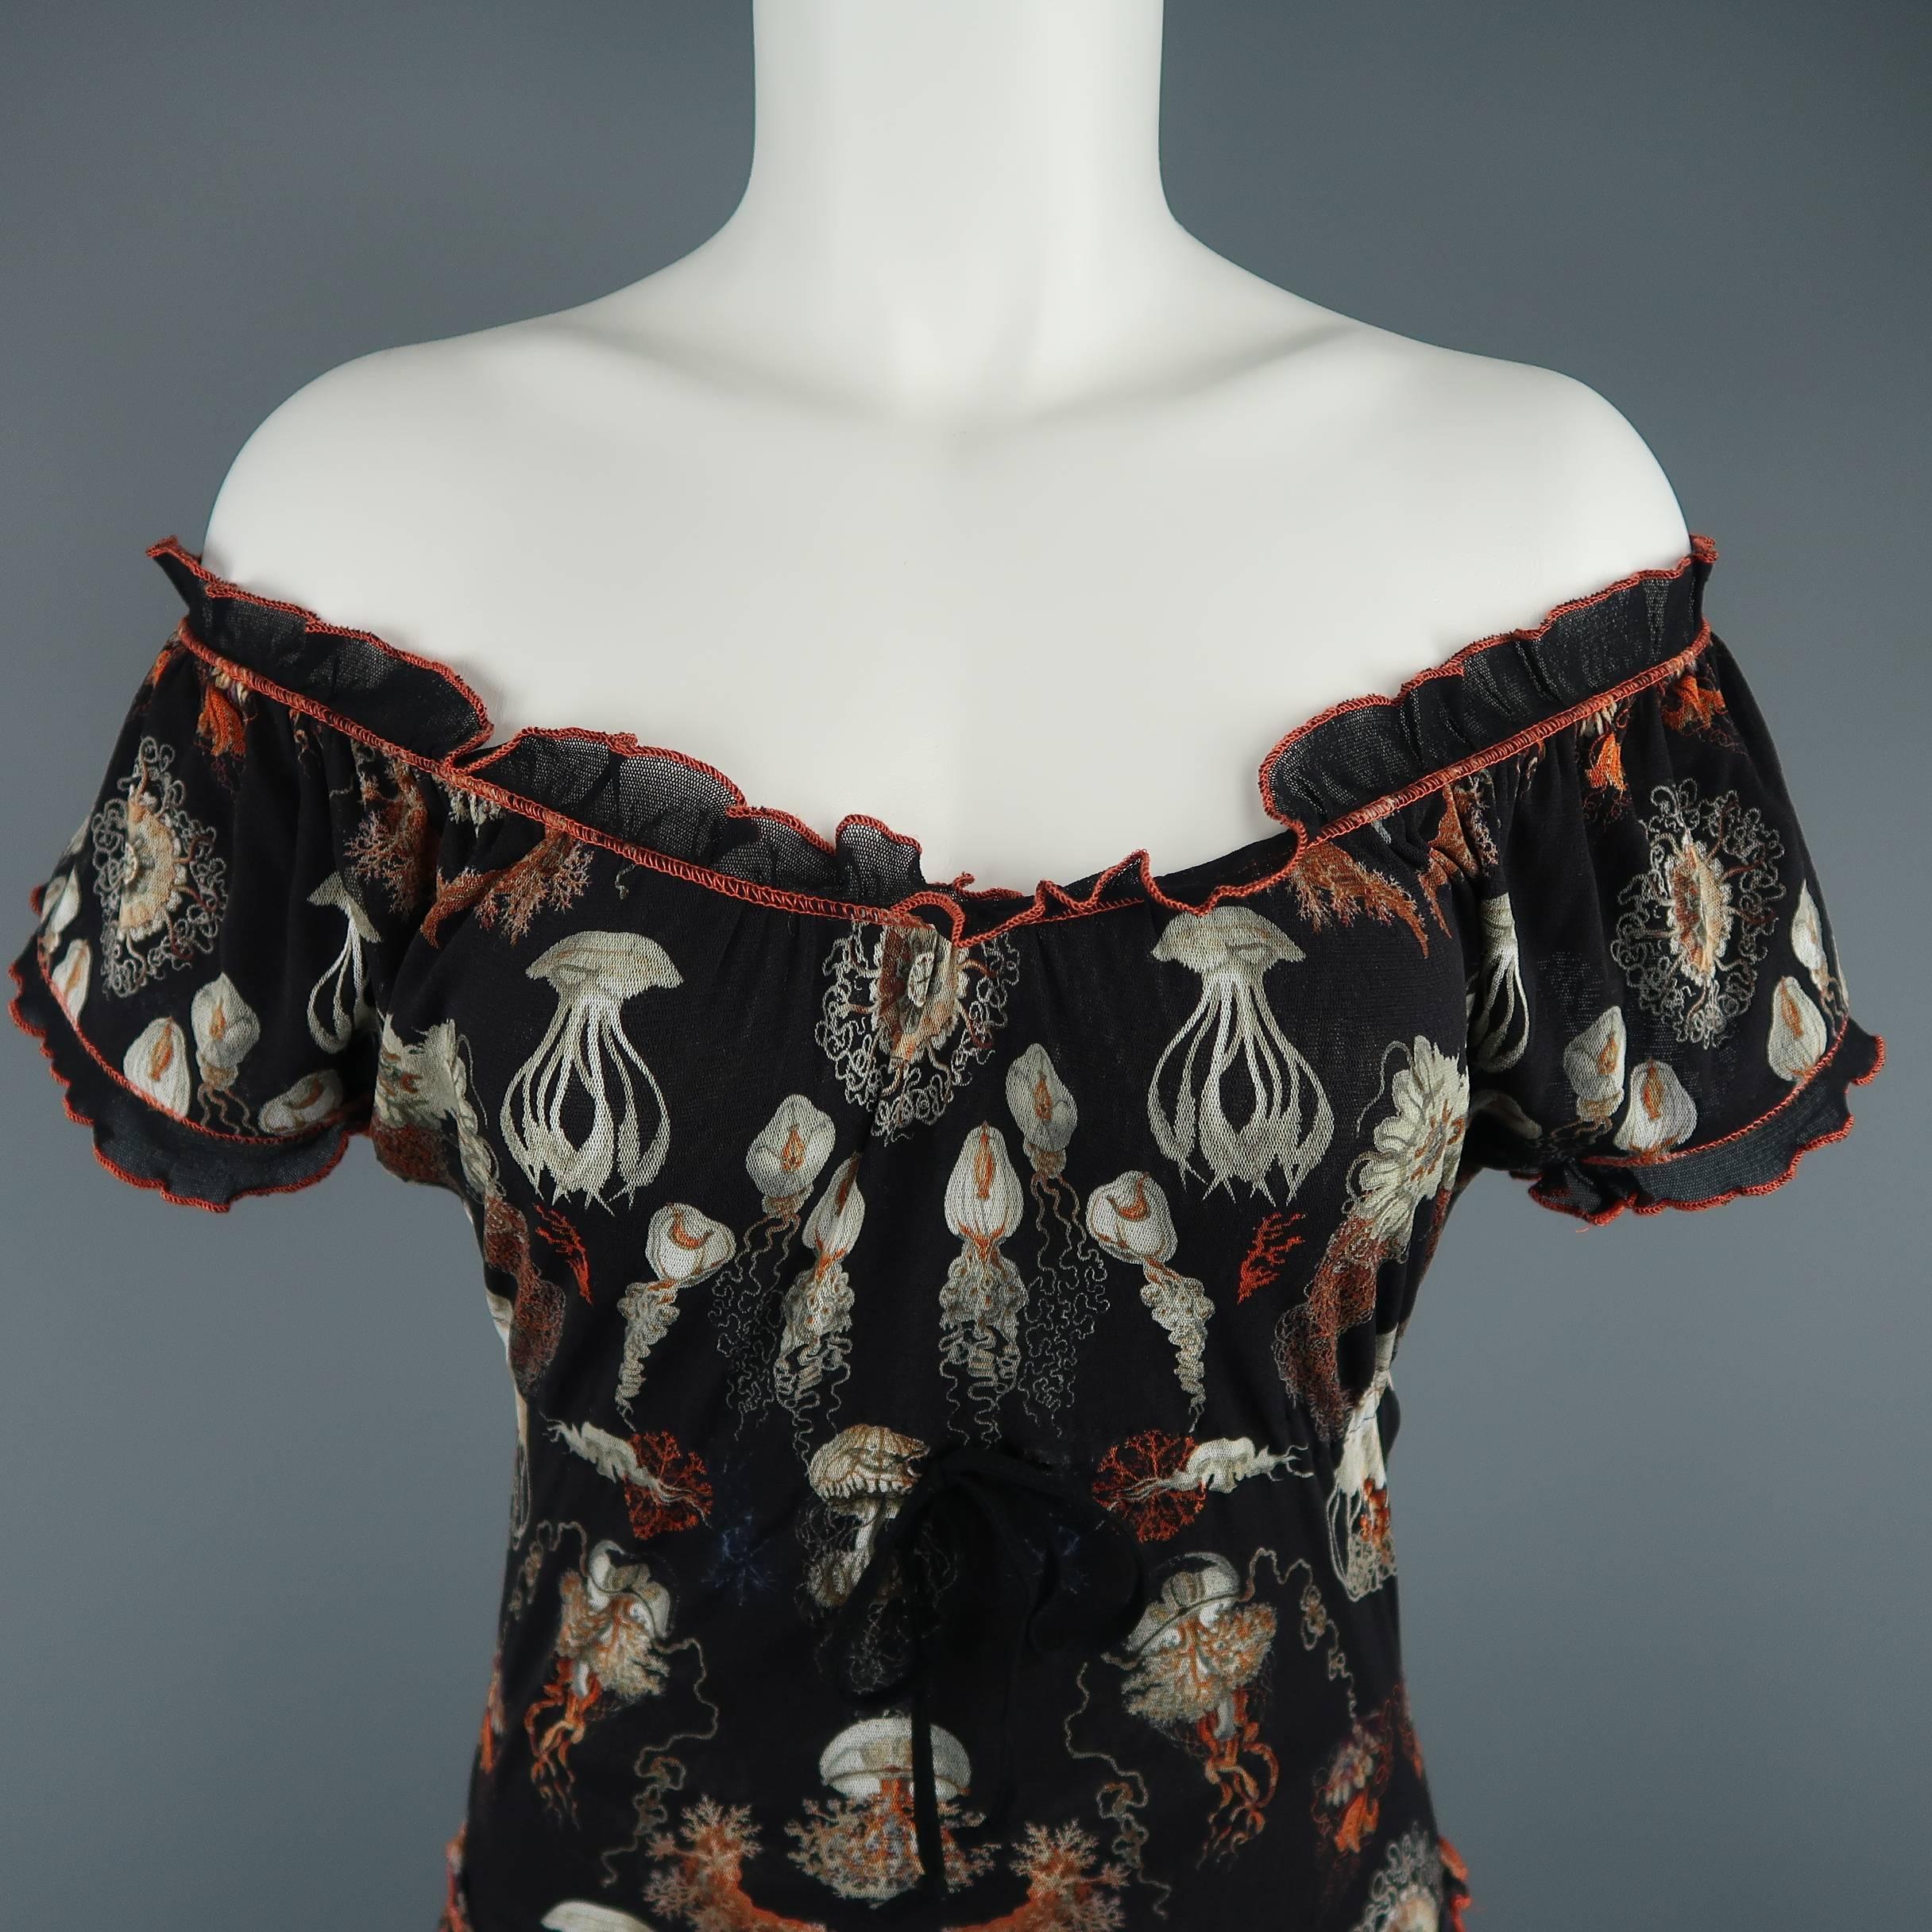 JEAN PAUL GAULTIER SOLEIL peasant style dress comes in black stretch micro mesh with all over beige and orange jellyfish print, orange stitched ruffle piping, tied underbust, and ruffled panel A line skirt. wear it on or off the shoulder. Made in